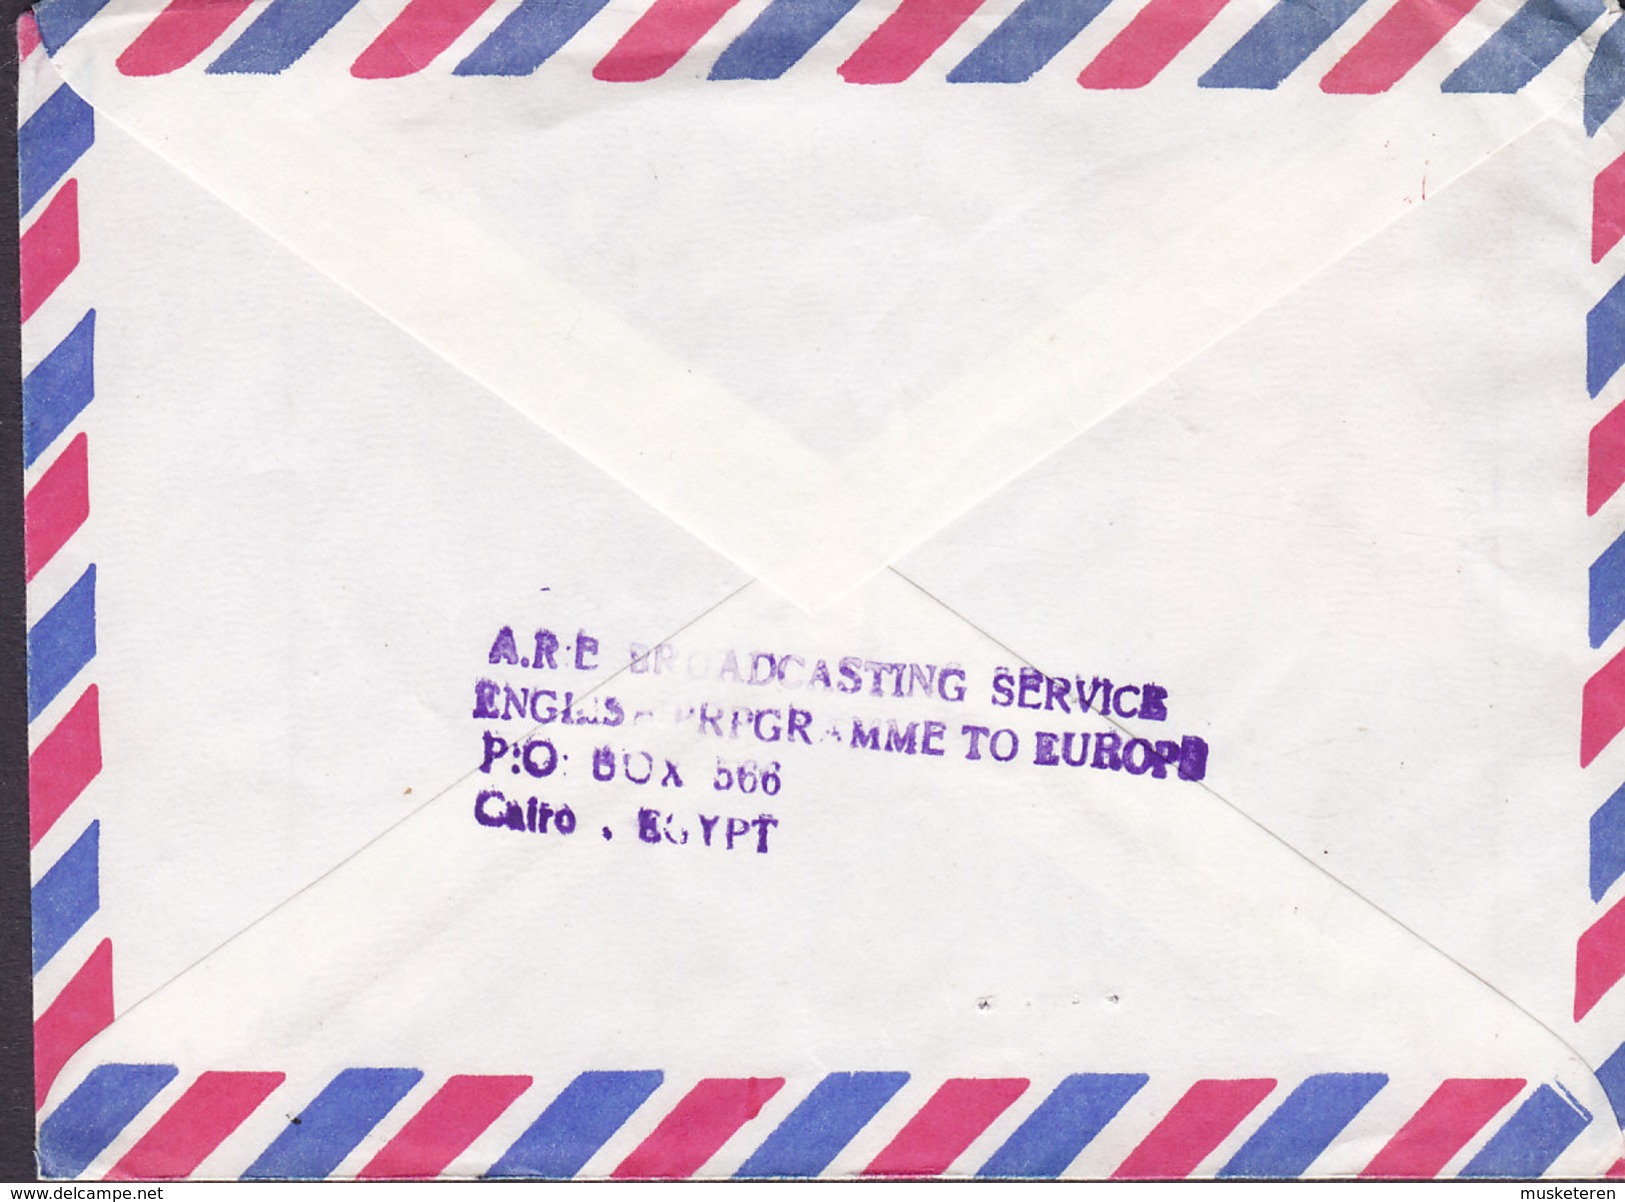 Egyp Egypte Air Mail A.R.B. BROADCASTING SERVICE Uncancelled CAIRO Cover Lettre Finland (2 Scans) - Poste Aérienne